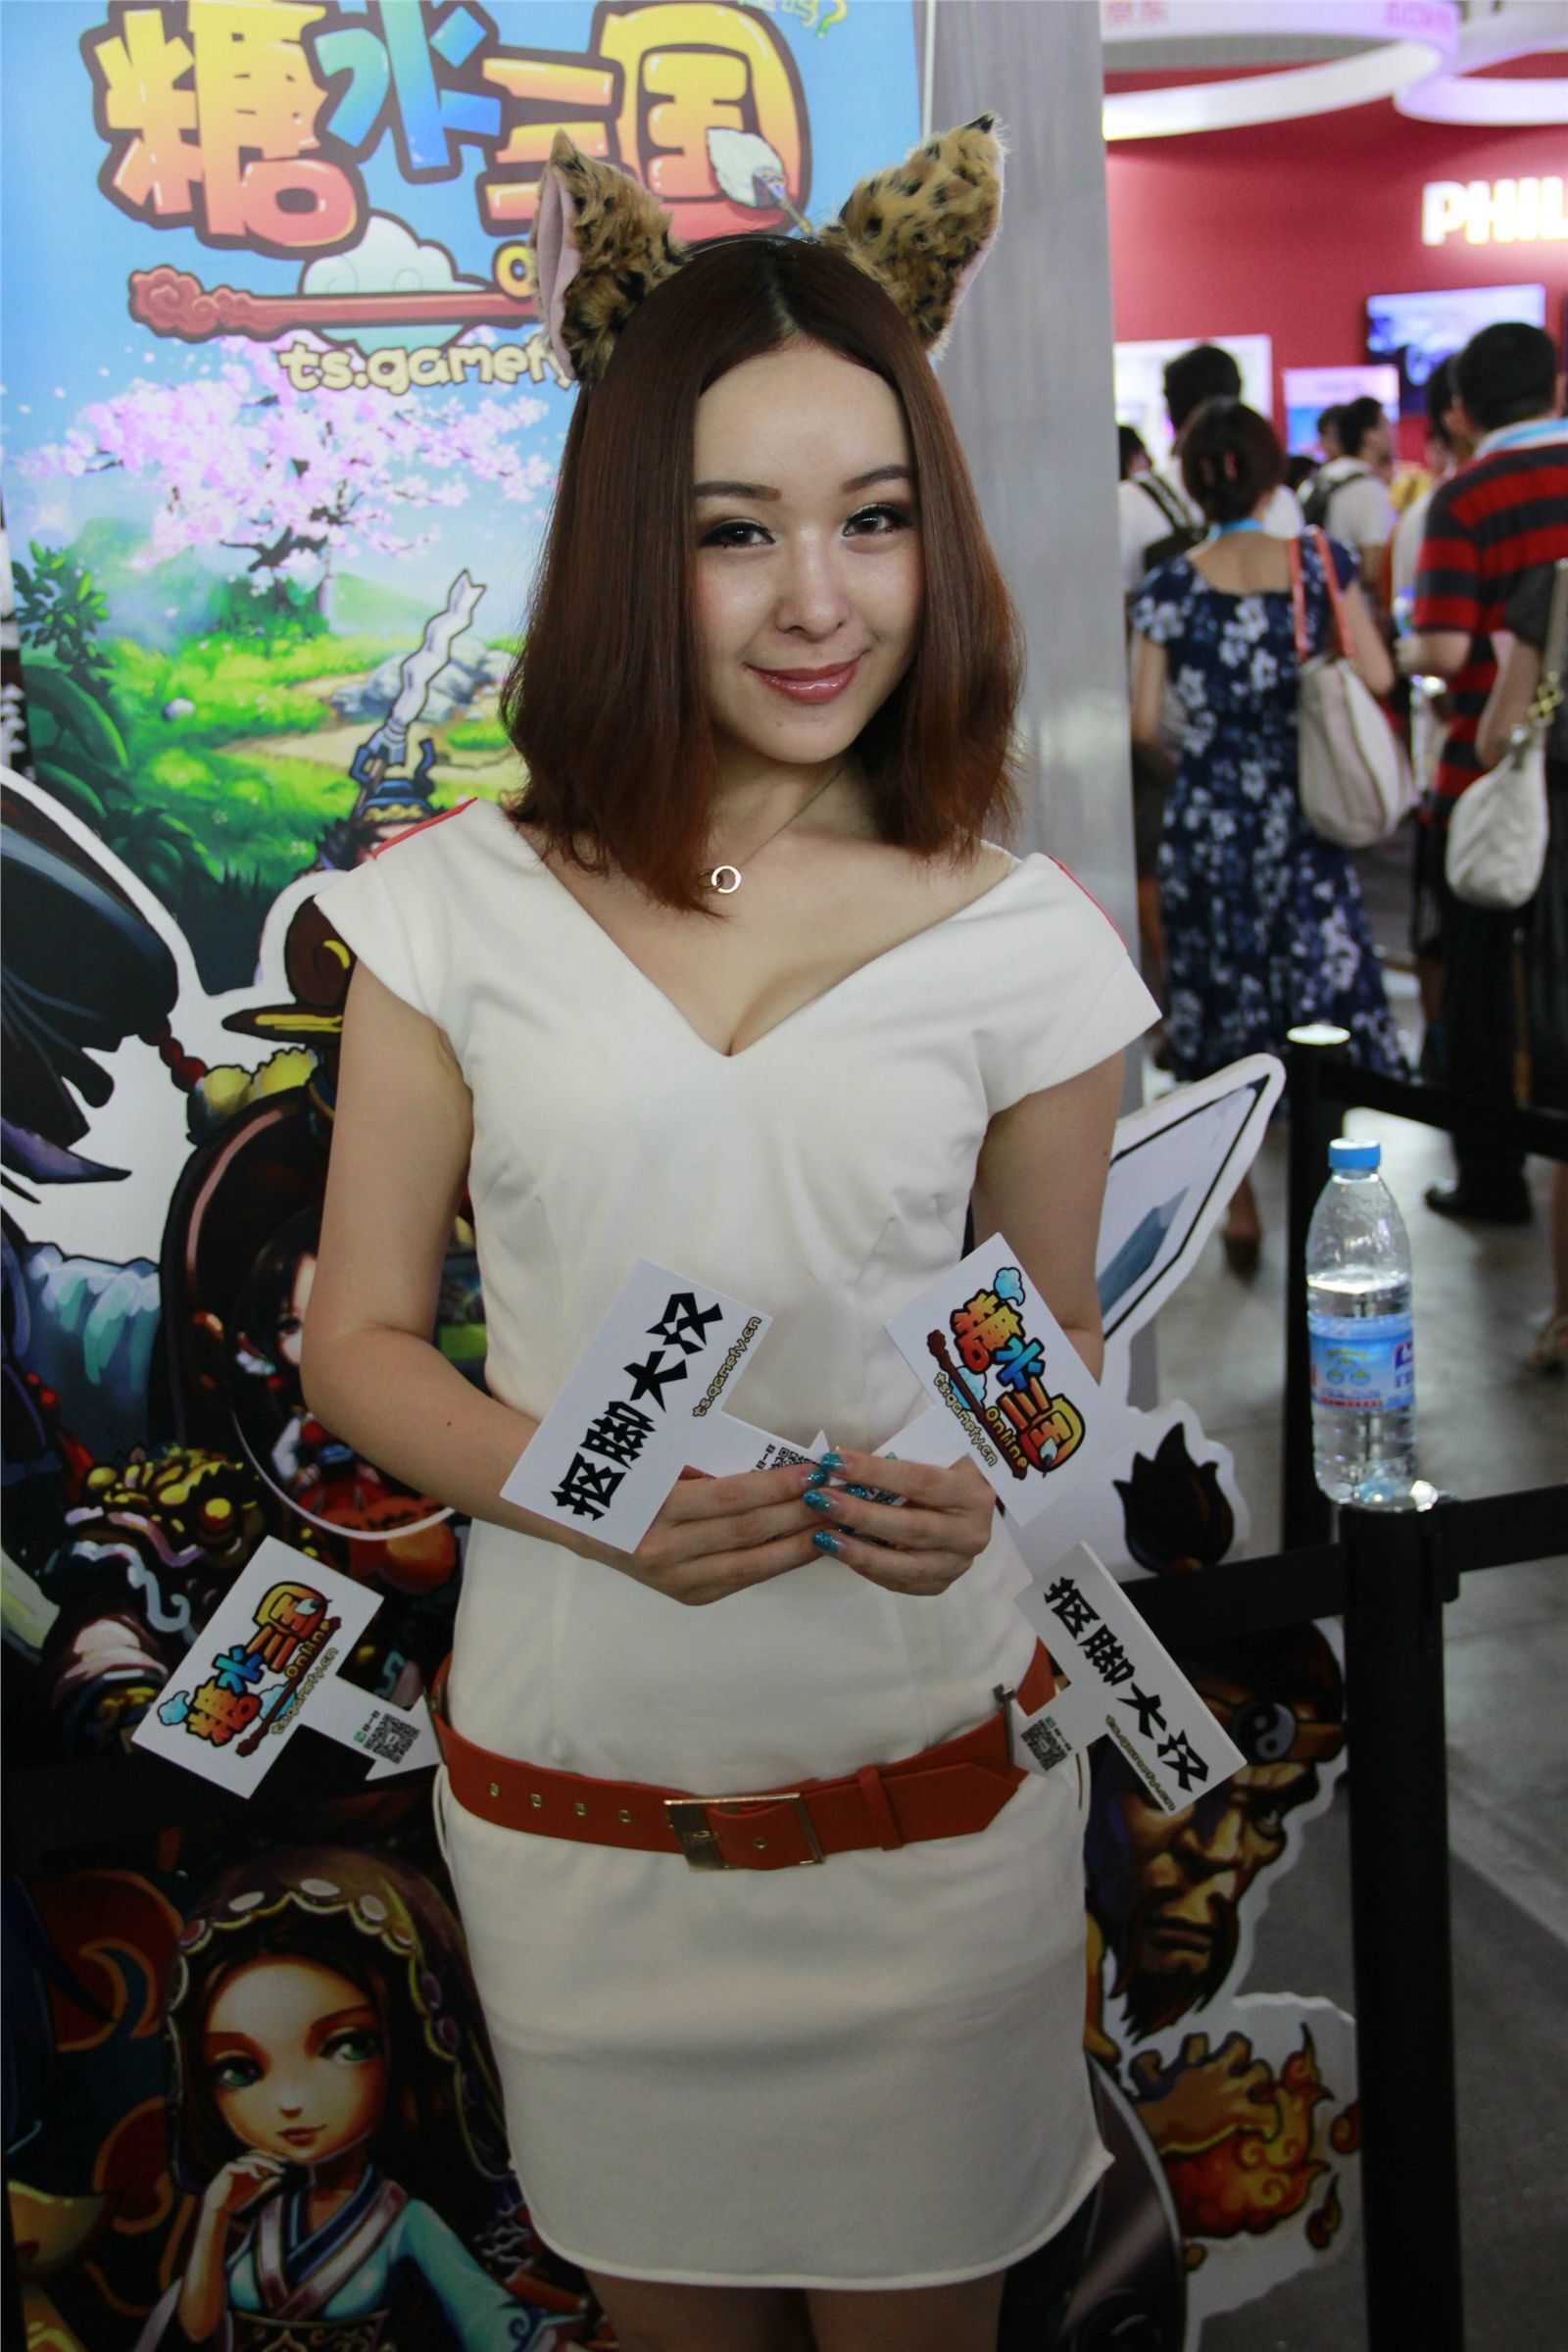 [online collection] the first day of the 11th Shanghai ChinaJoy 2013